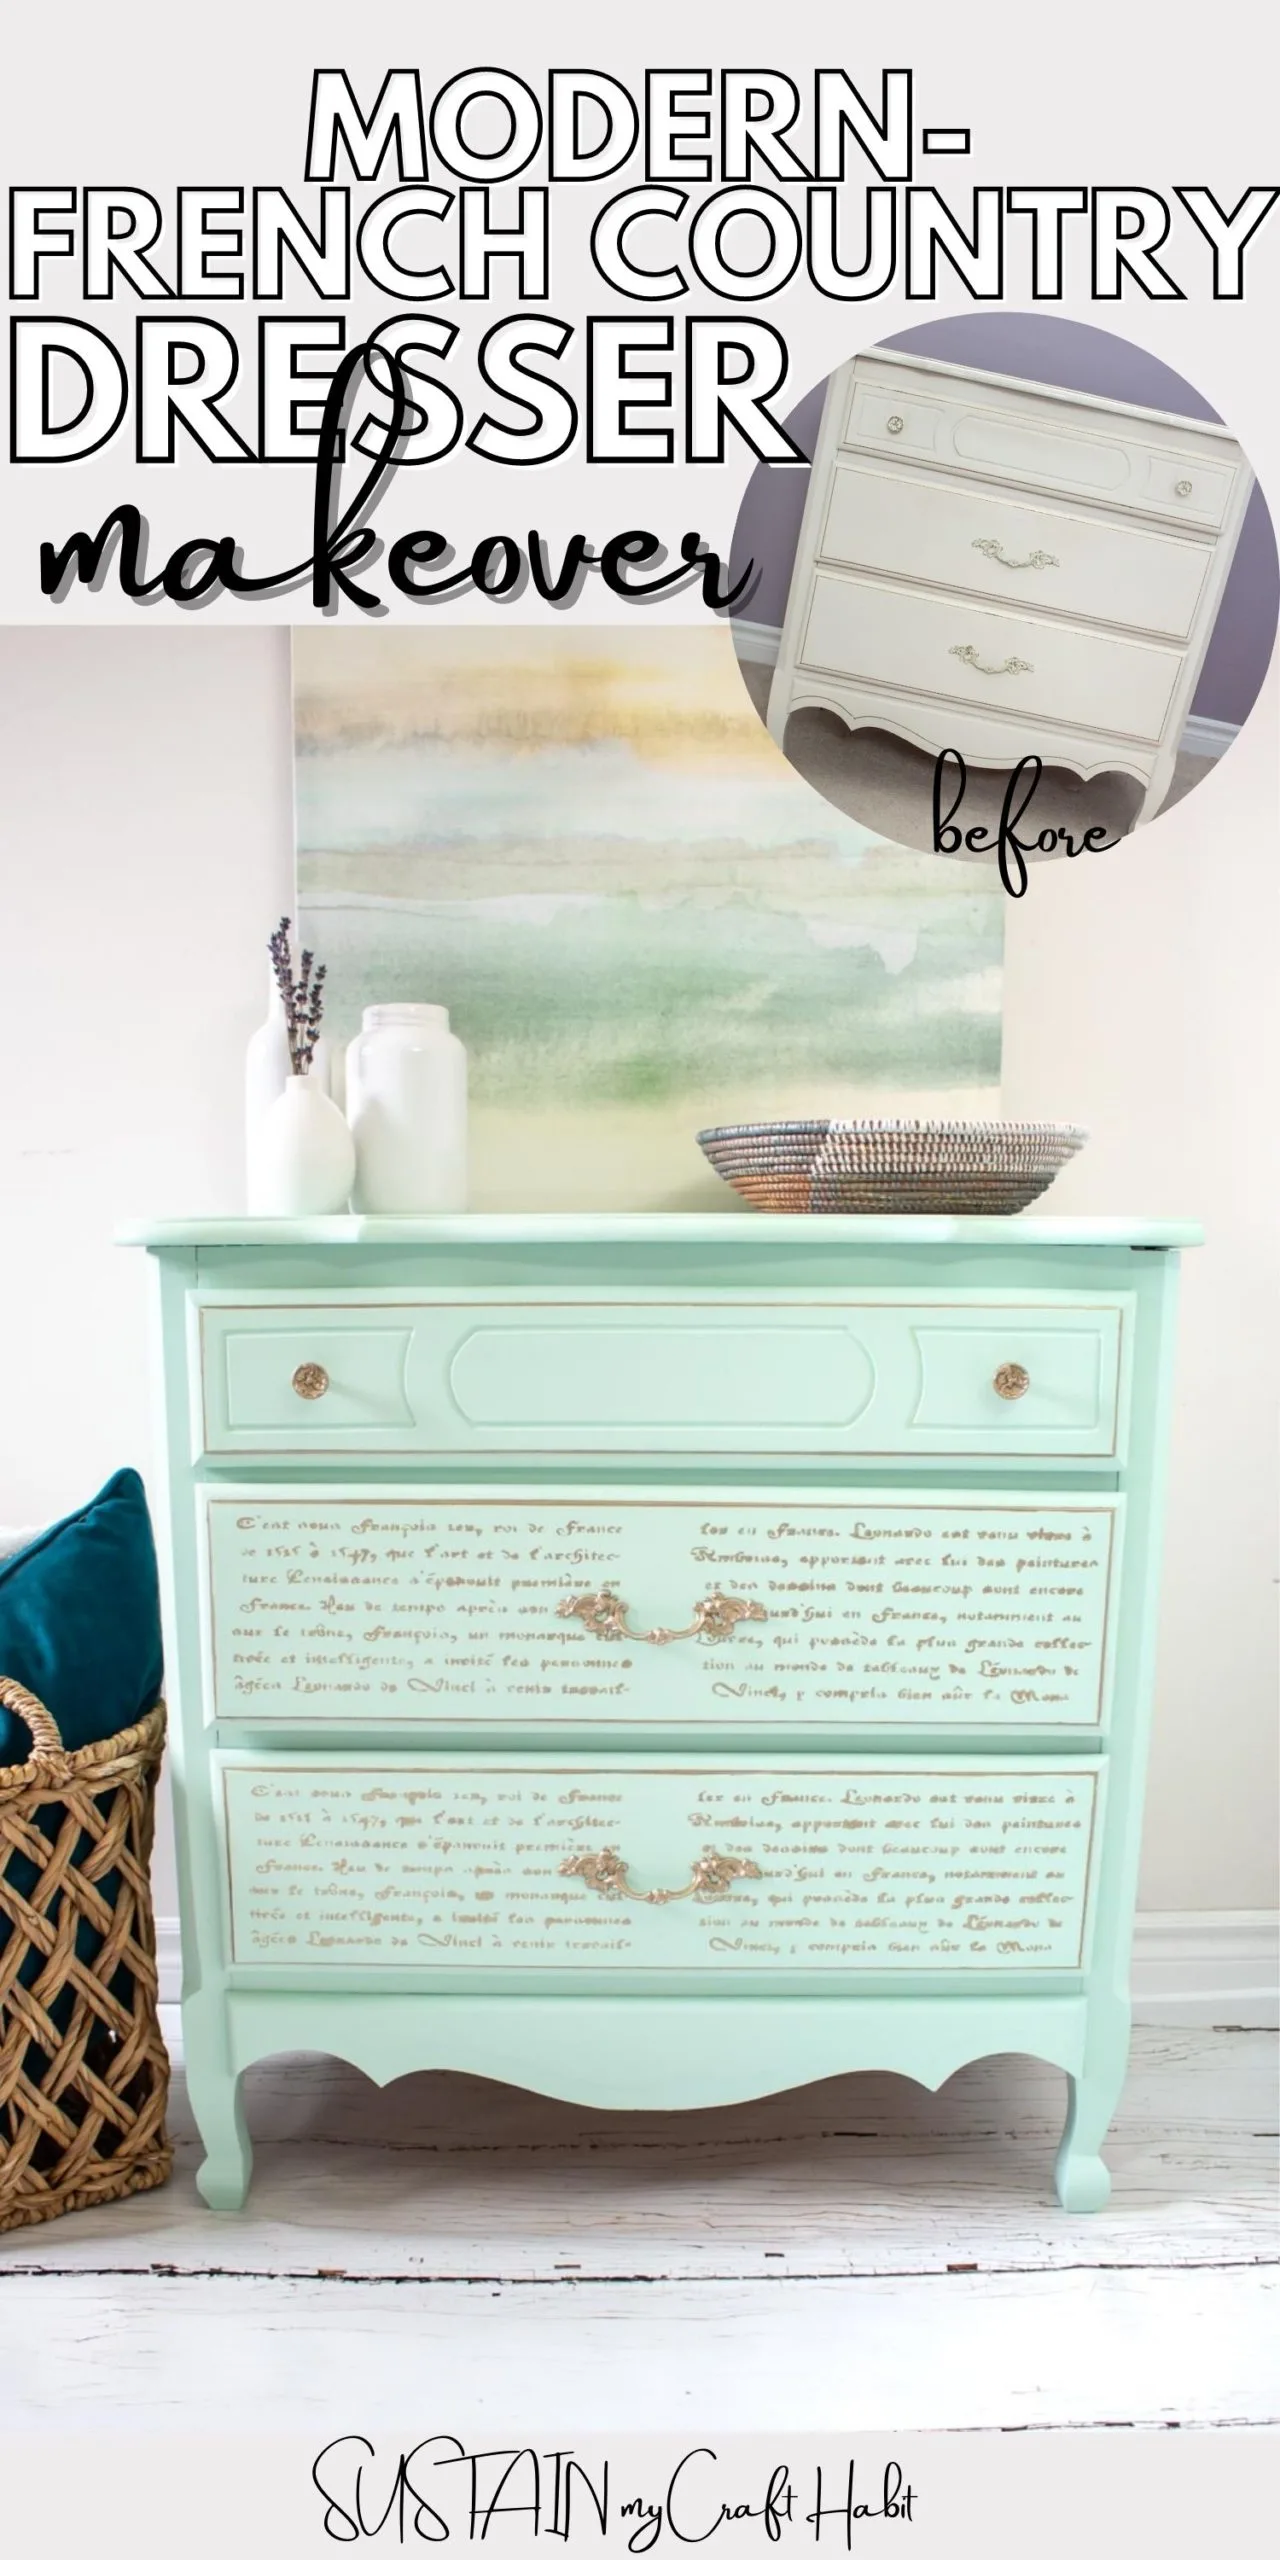 Finished modern french country furniture makeover with text overlay.